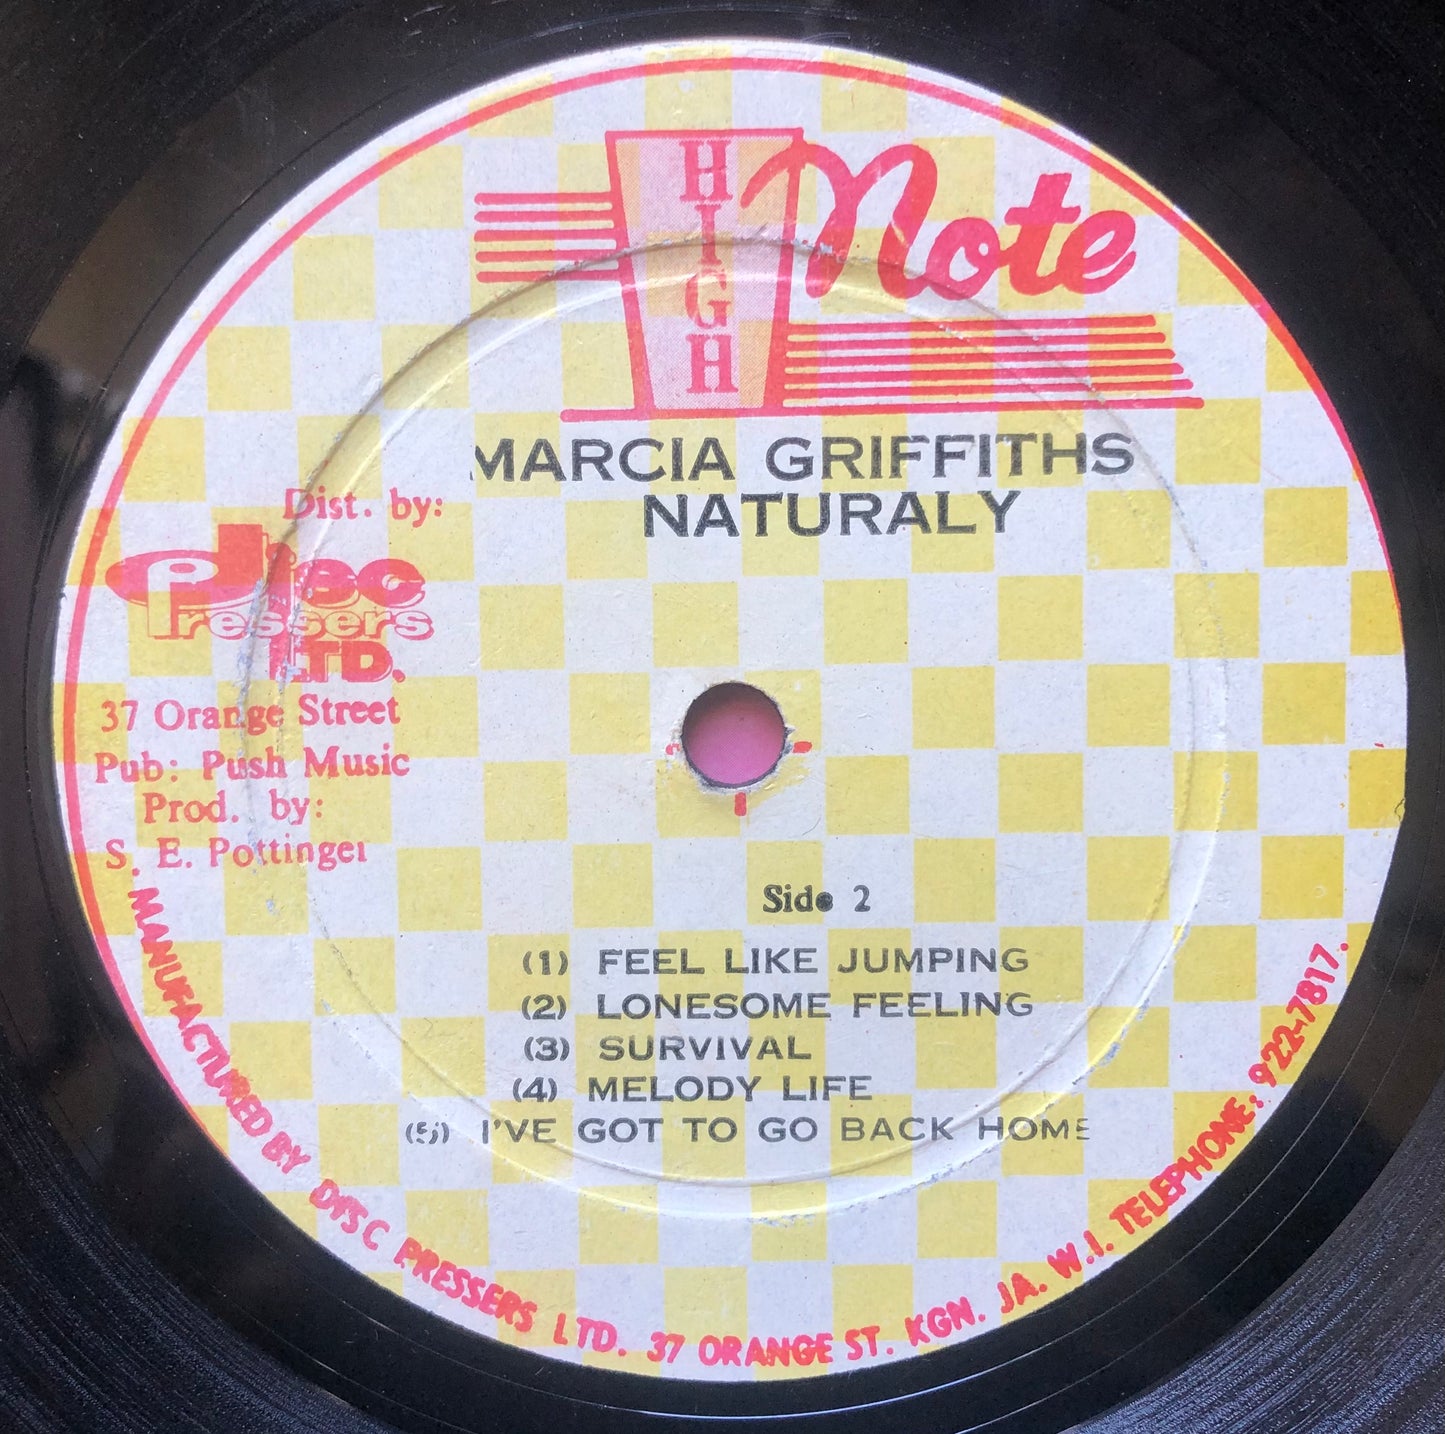 Marcia Griffiths - Naturally 1978 Jamaican press High Note/Disc Pressers